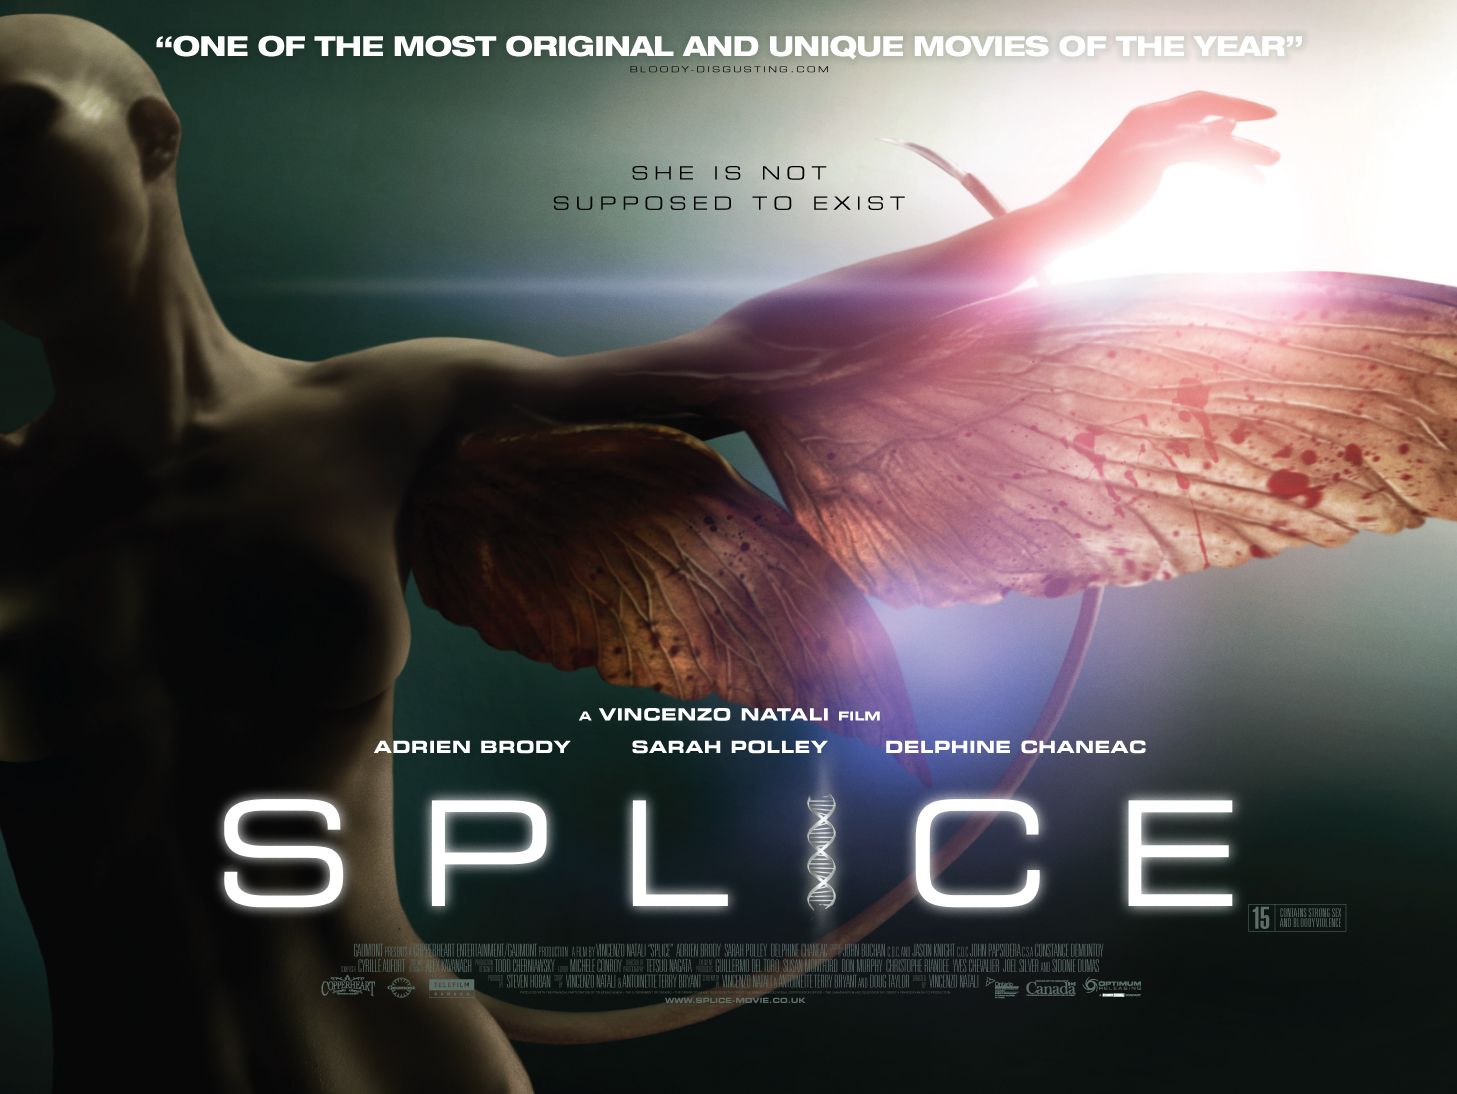 Exhale: Movie Review (Yay): Splice (2009)